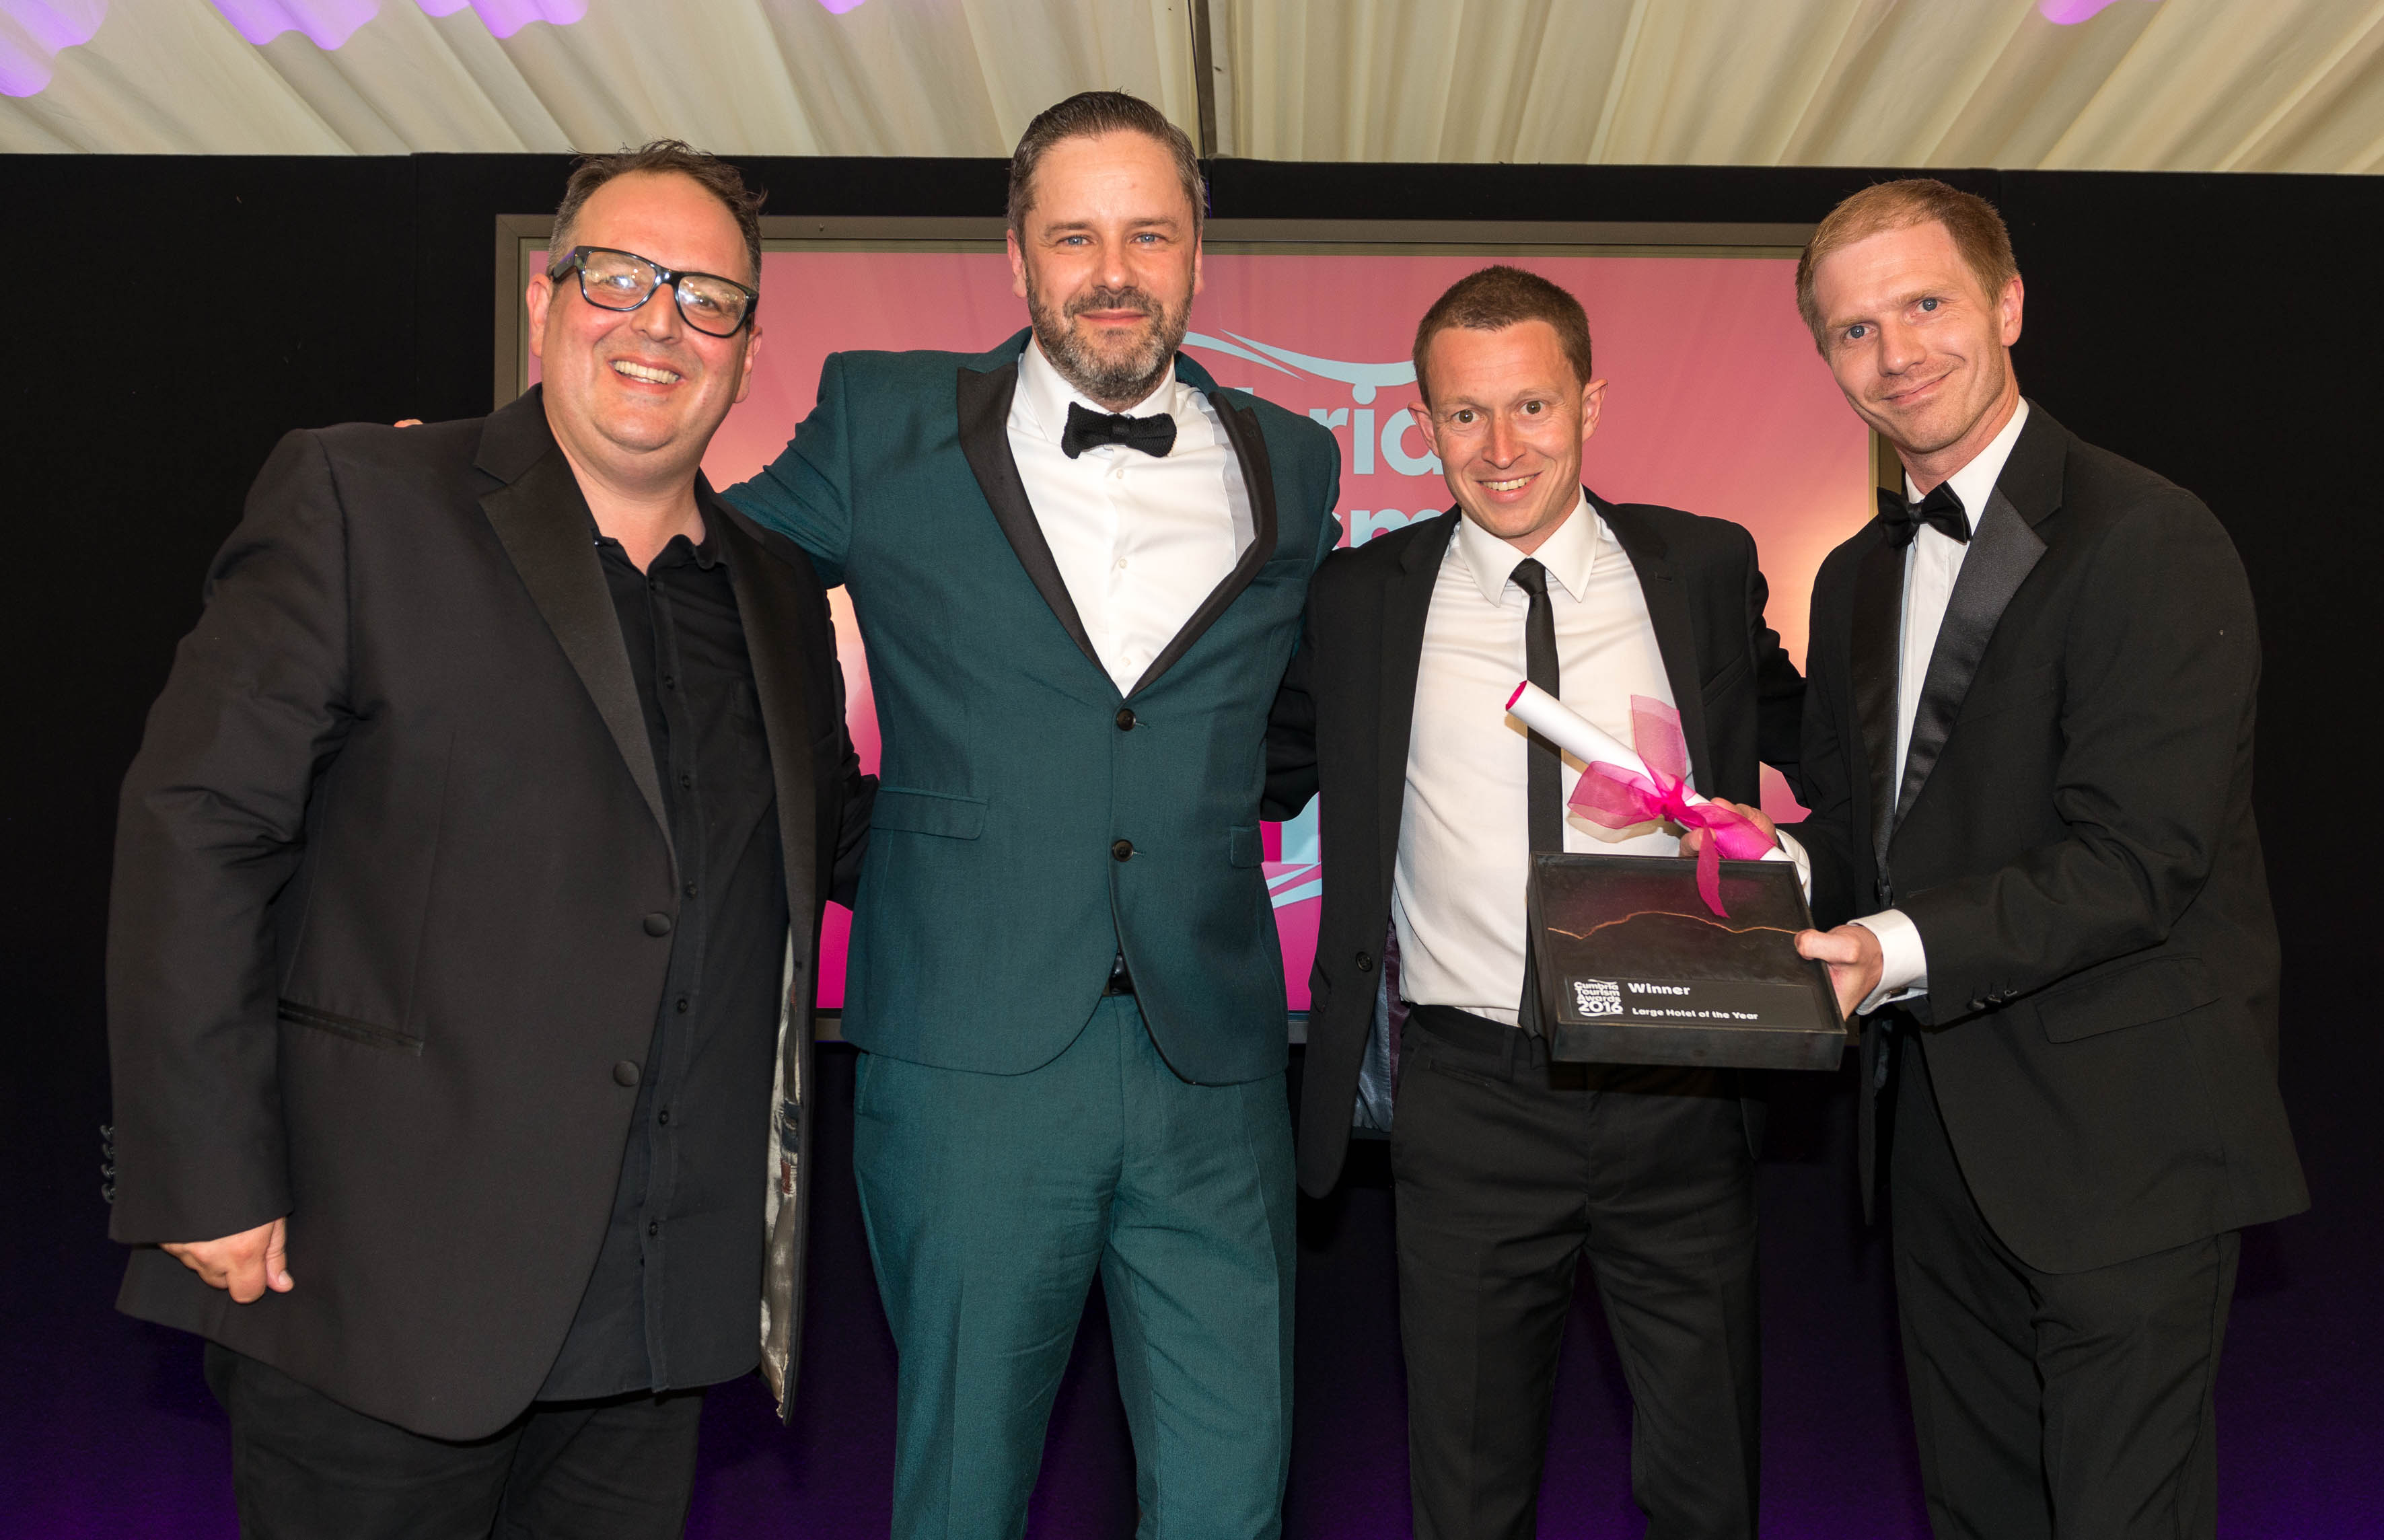 CUMBRIA TOURISM AWARDS 2016 --- Large Hotel of the Year winner - Waterhead Hotel, Ambleside. (l-r) Justin Moorhouse, Matt Stanaway, Anthony Sutcliffe, and award sponsor Richard Andrew of Armstrong Watson. // Annual award ceremony from Cumbria Tourism celebrating the best in the county's tourist attractions. Held at Cartmel Racecourse and hosted by comedian Justin Moorhouse. Wednesday 22nd June 2016. HARRY ATKINSON